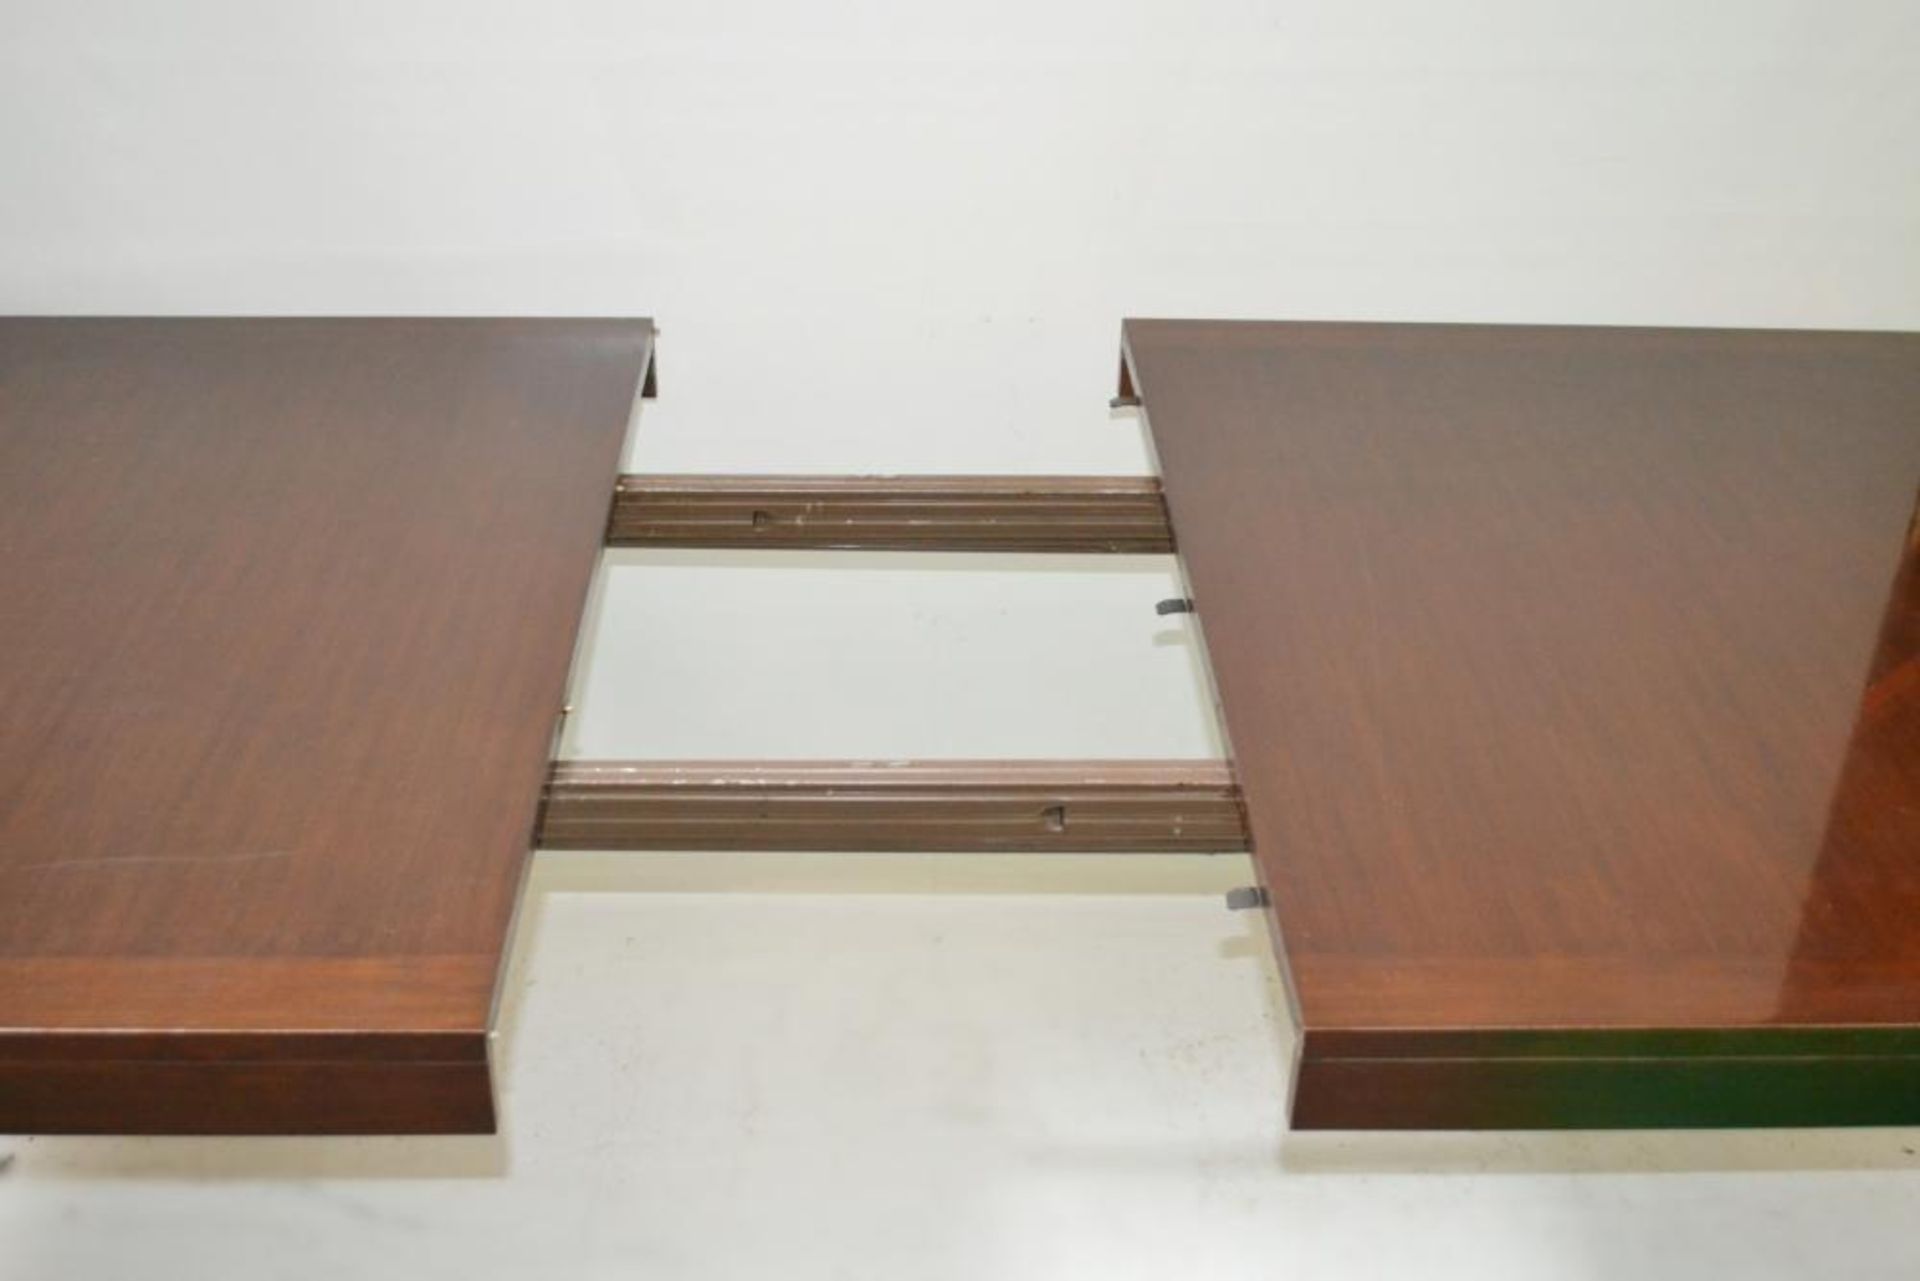 1 x BARBARA BARRY "Perfect Parsons" Dining Table In Dark Walnut - Includes Extensions Leaves - 2.8 M - Image 3 of 17